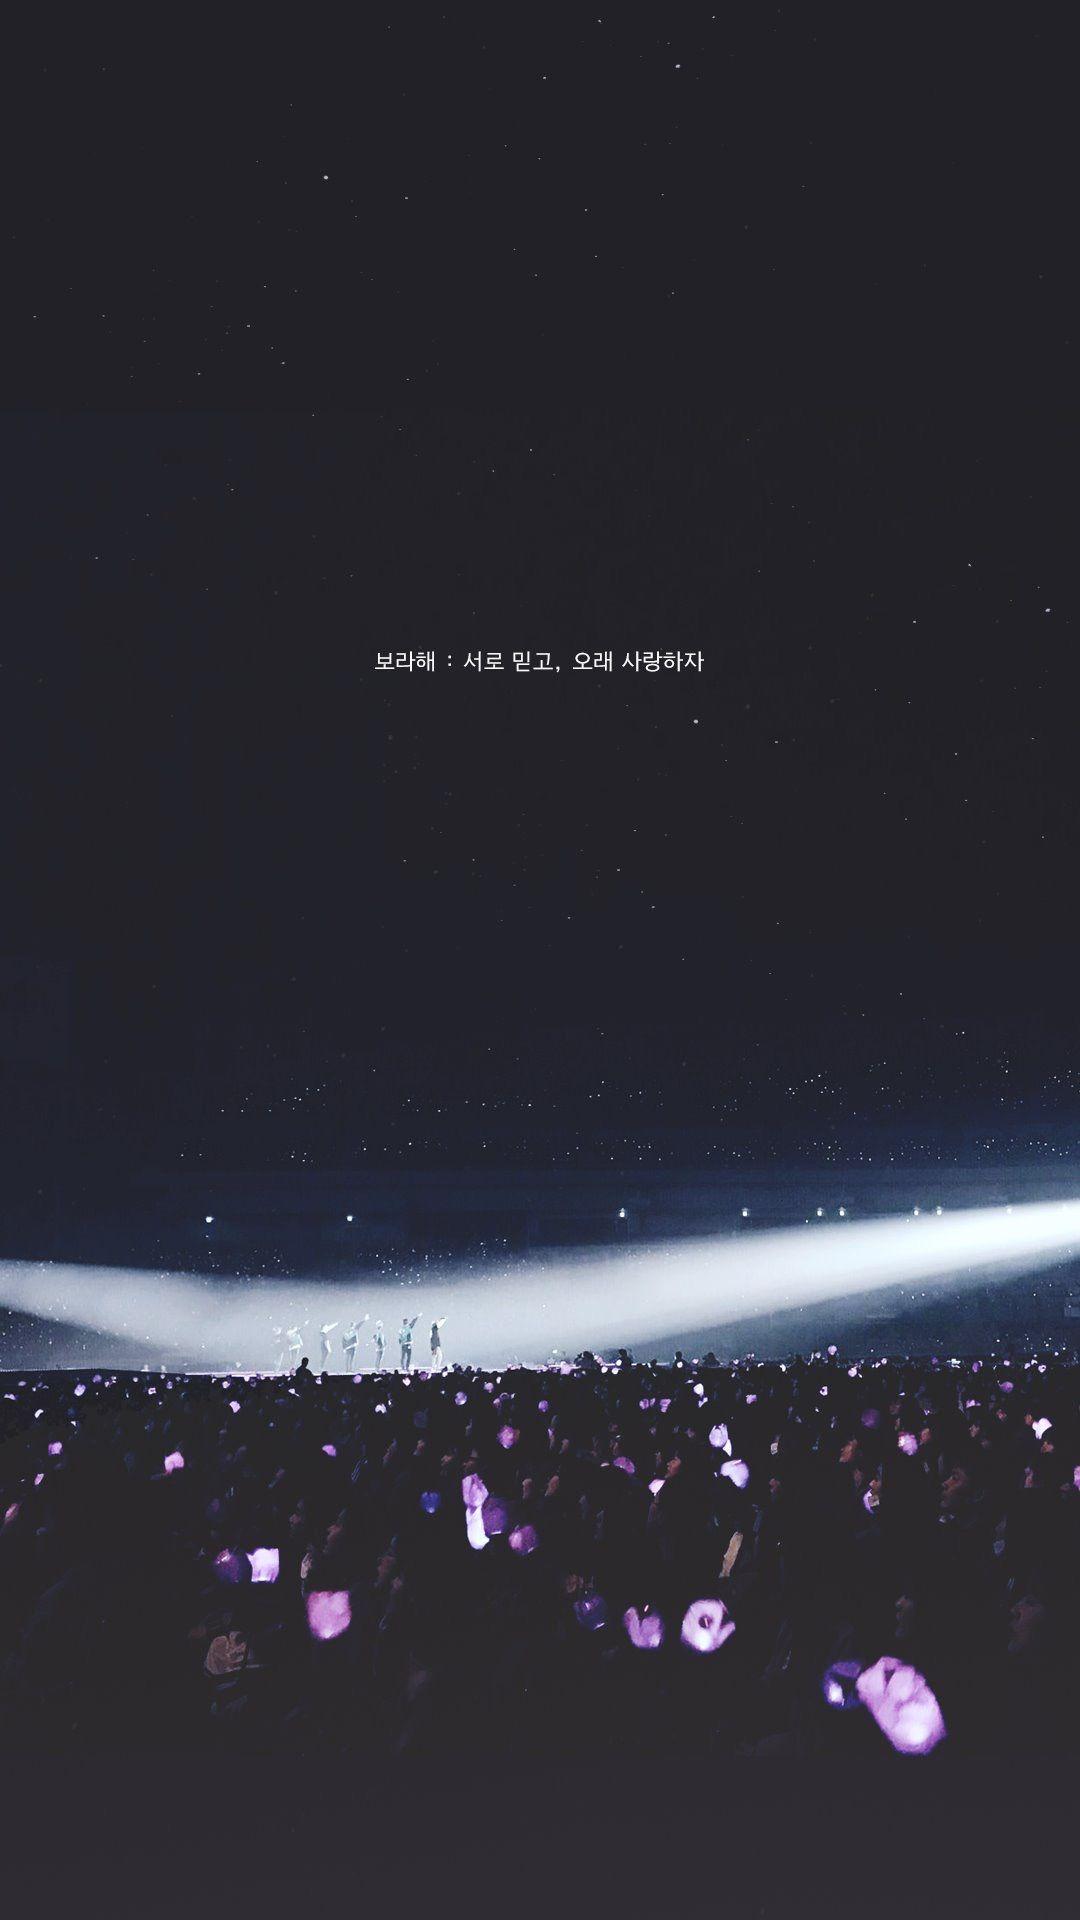 i purple you, let's love each other forever. Bts